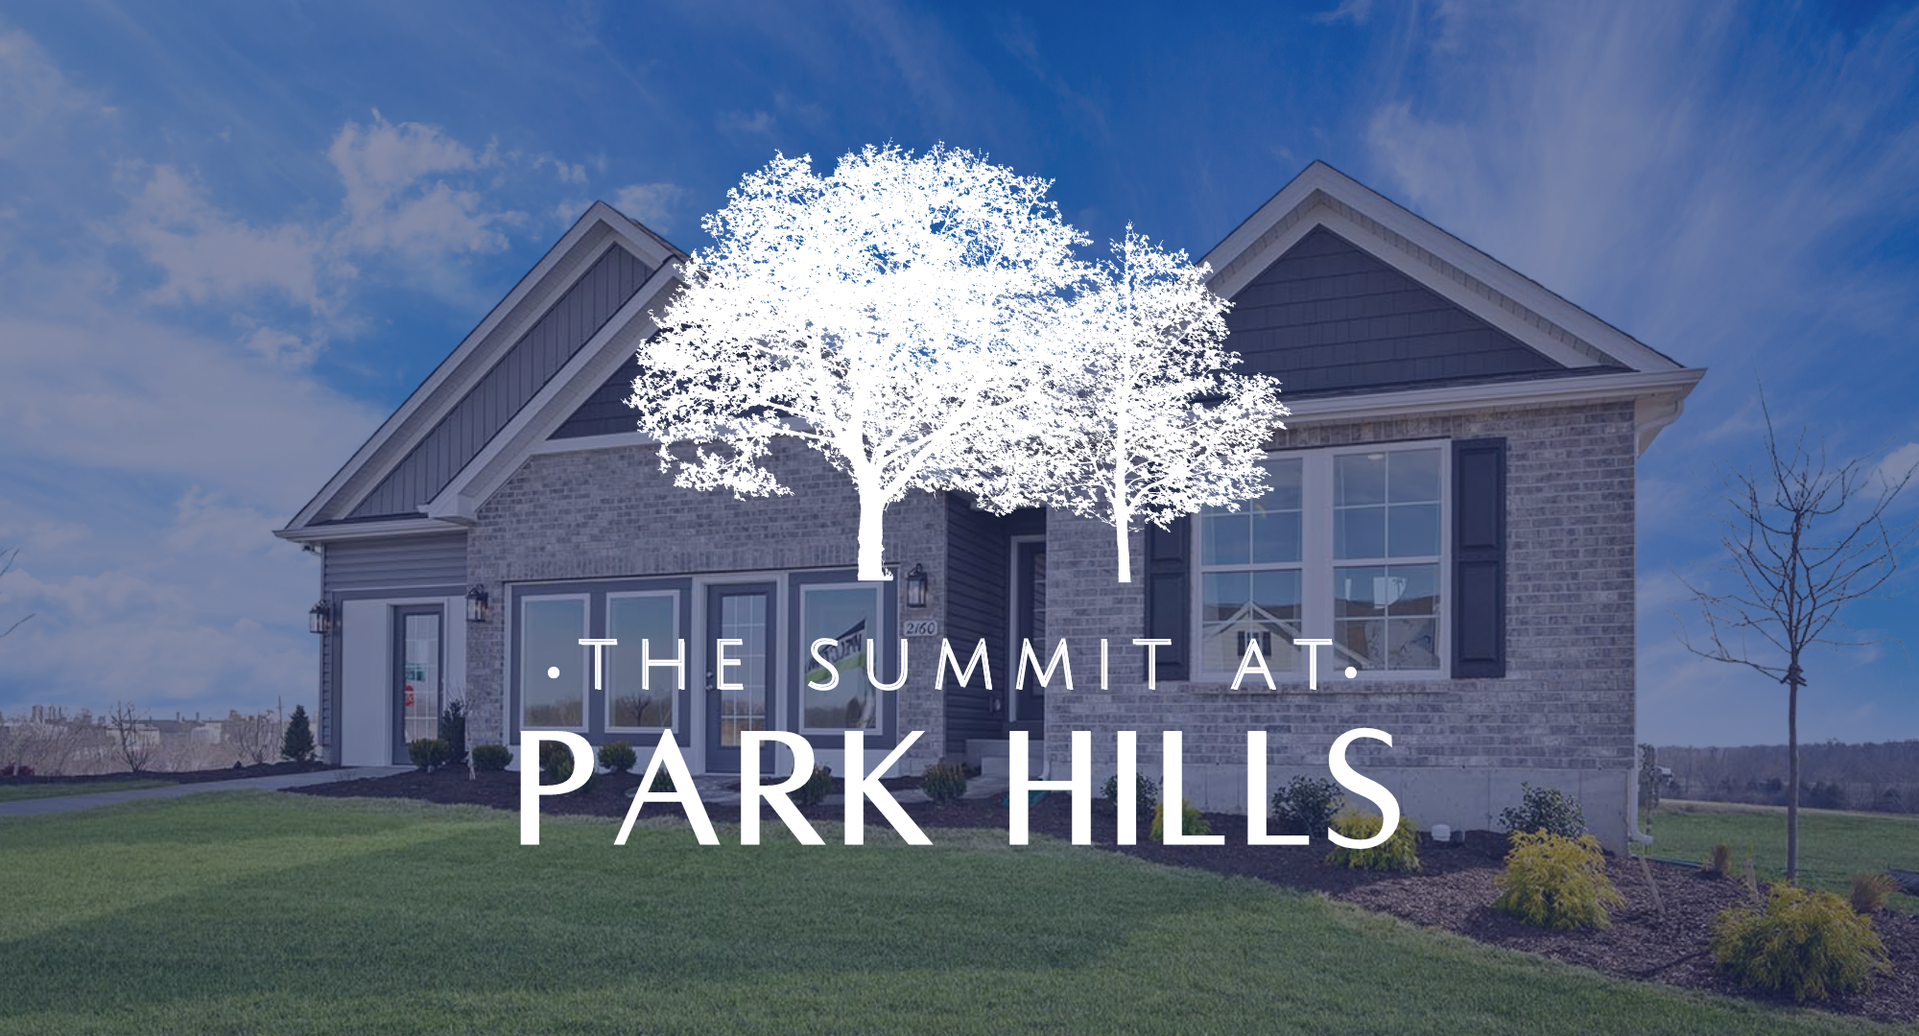 New Homes Troy, MO - The Summit at Park Hills. The Summit at Park Hills New Homes in Troy, MO